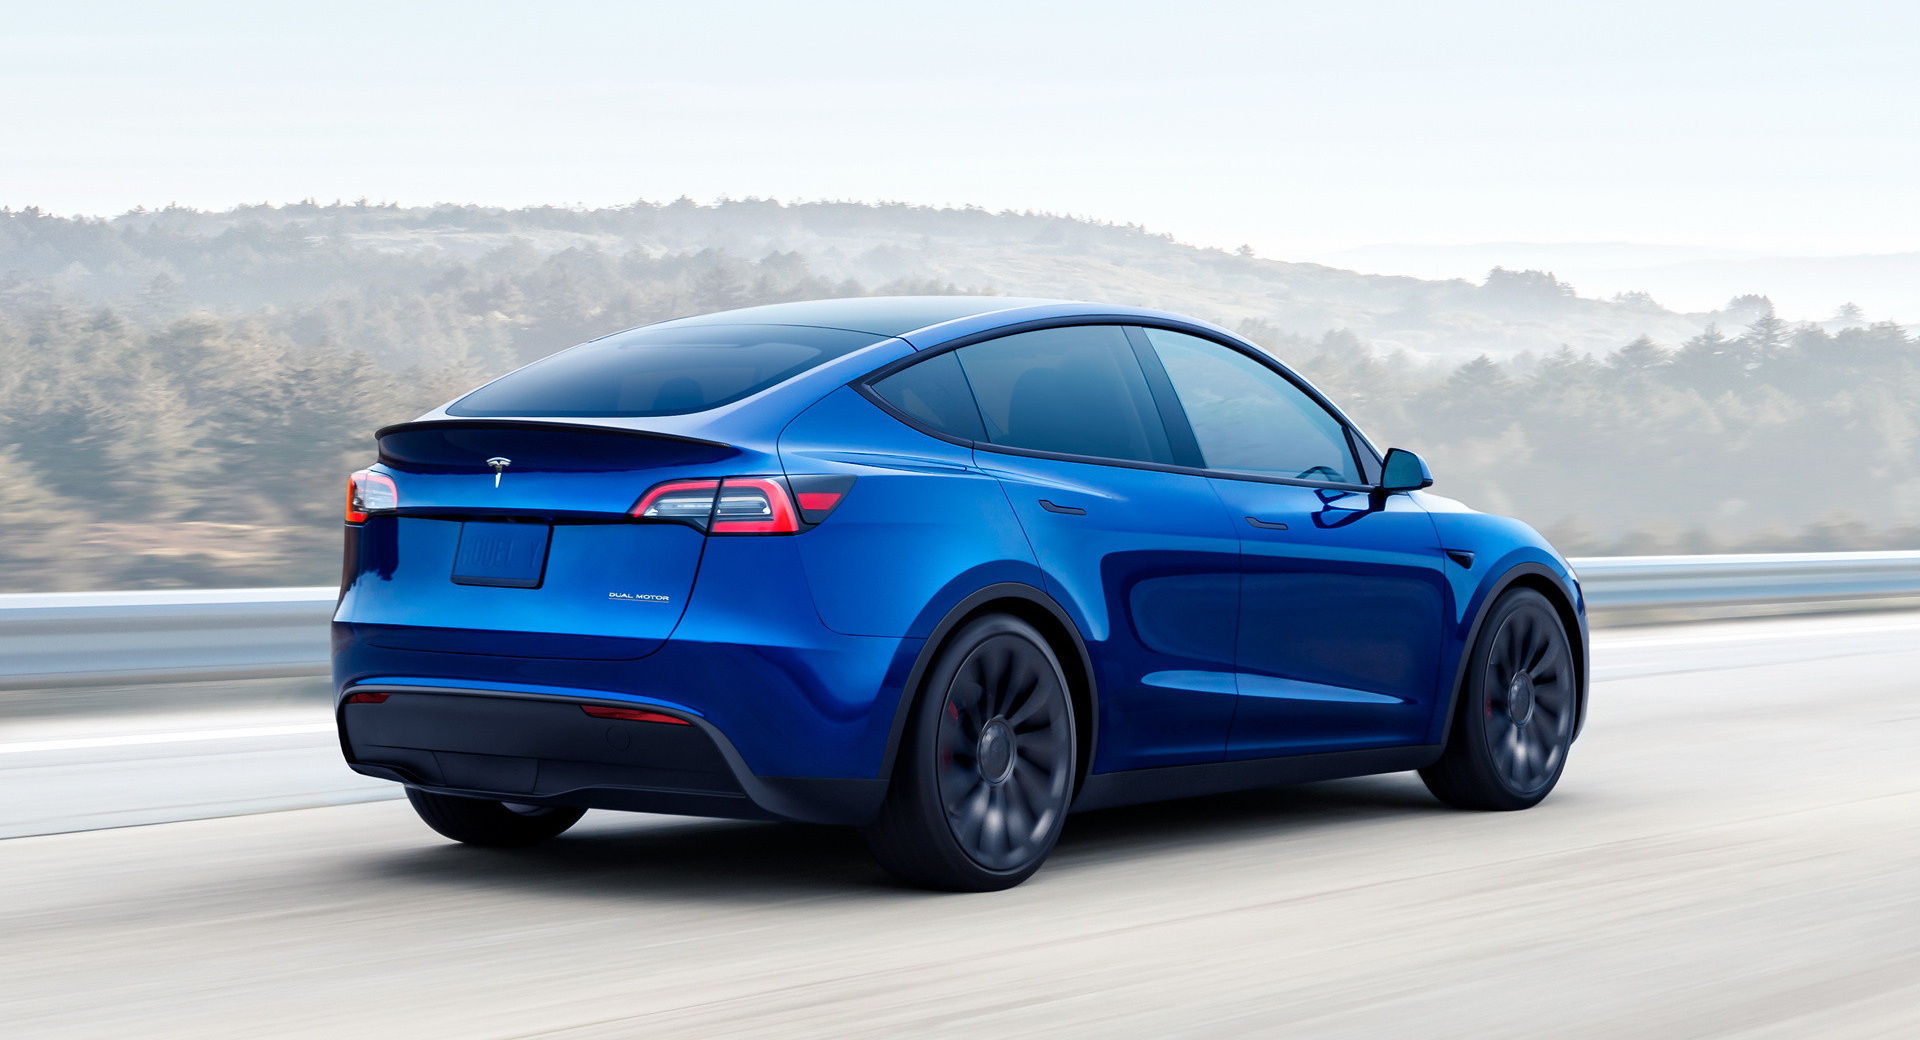 Tesla Model Y revealed with up to 300 miles of range, $41,200